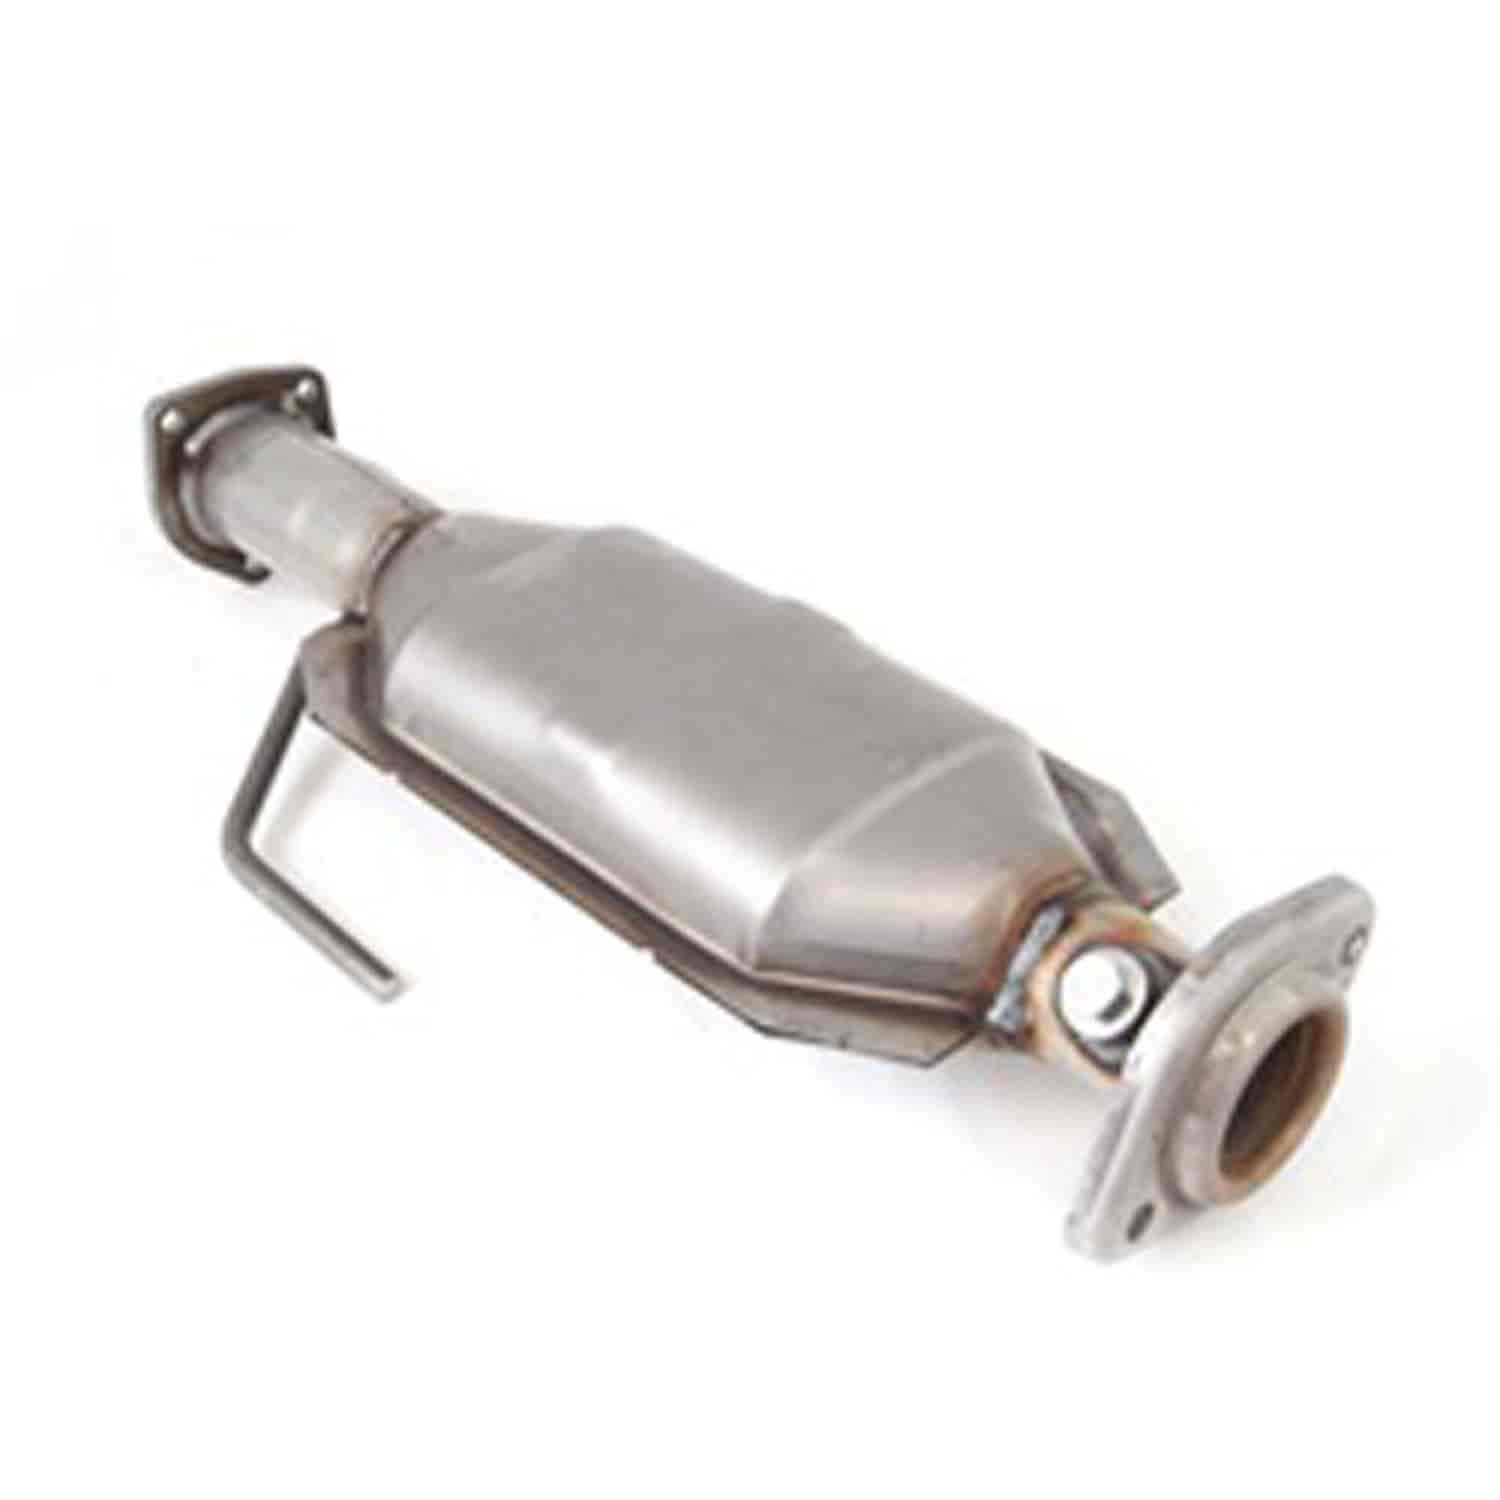 Replacement catalytic converter from Omix-ADA, Fits 00-02 Jeep